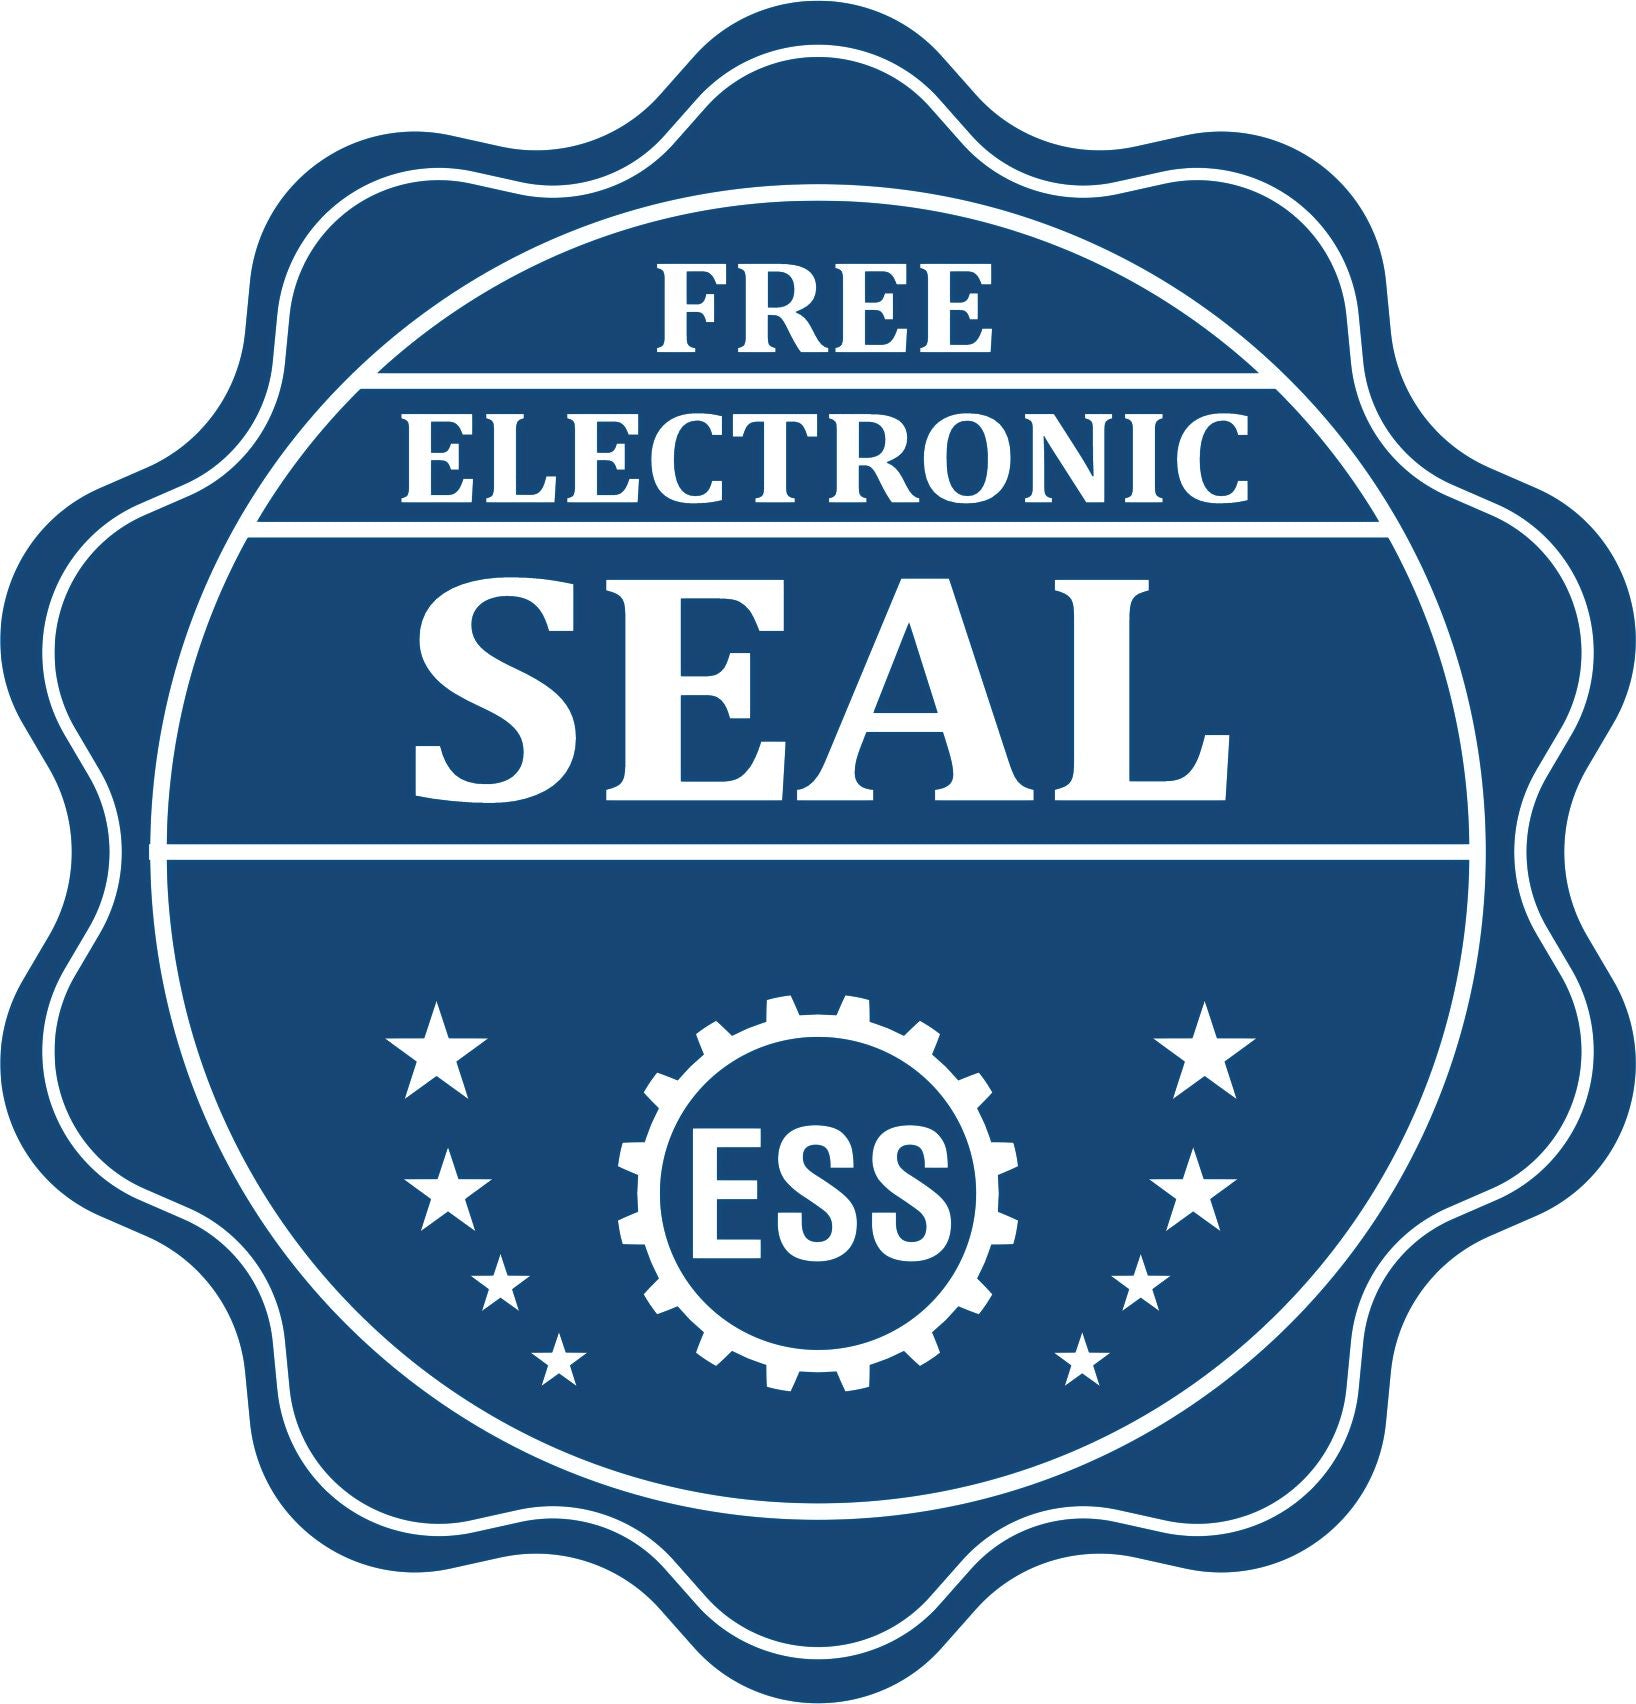 A badge showing a free electronic seal for the State of Montana Extended Long Reach Geologist Seal with stars and the ESS gear on the emblem.